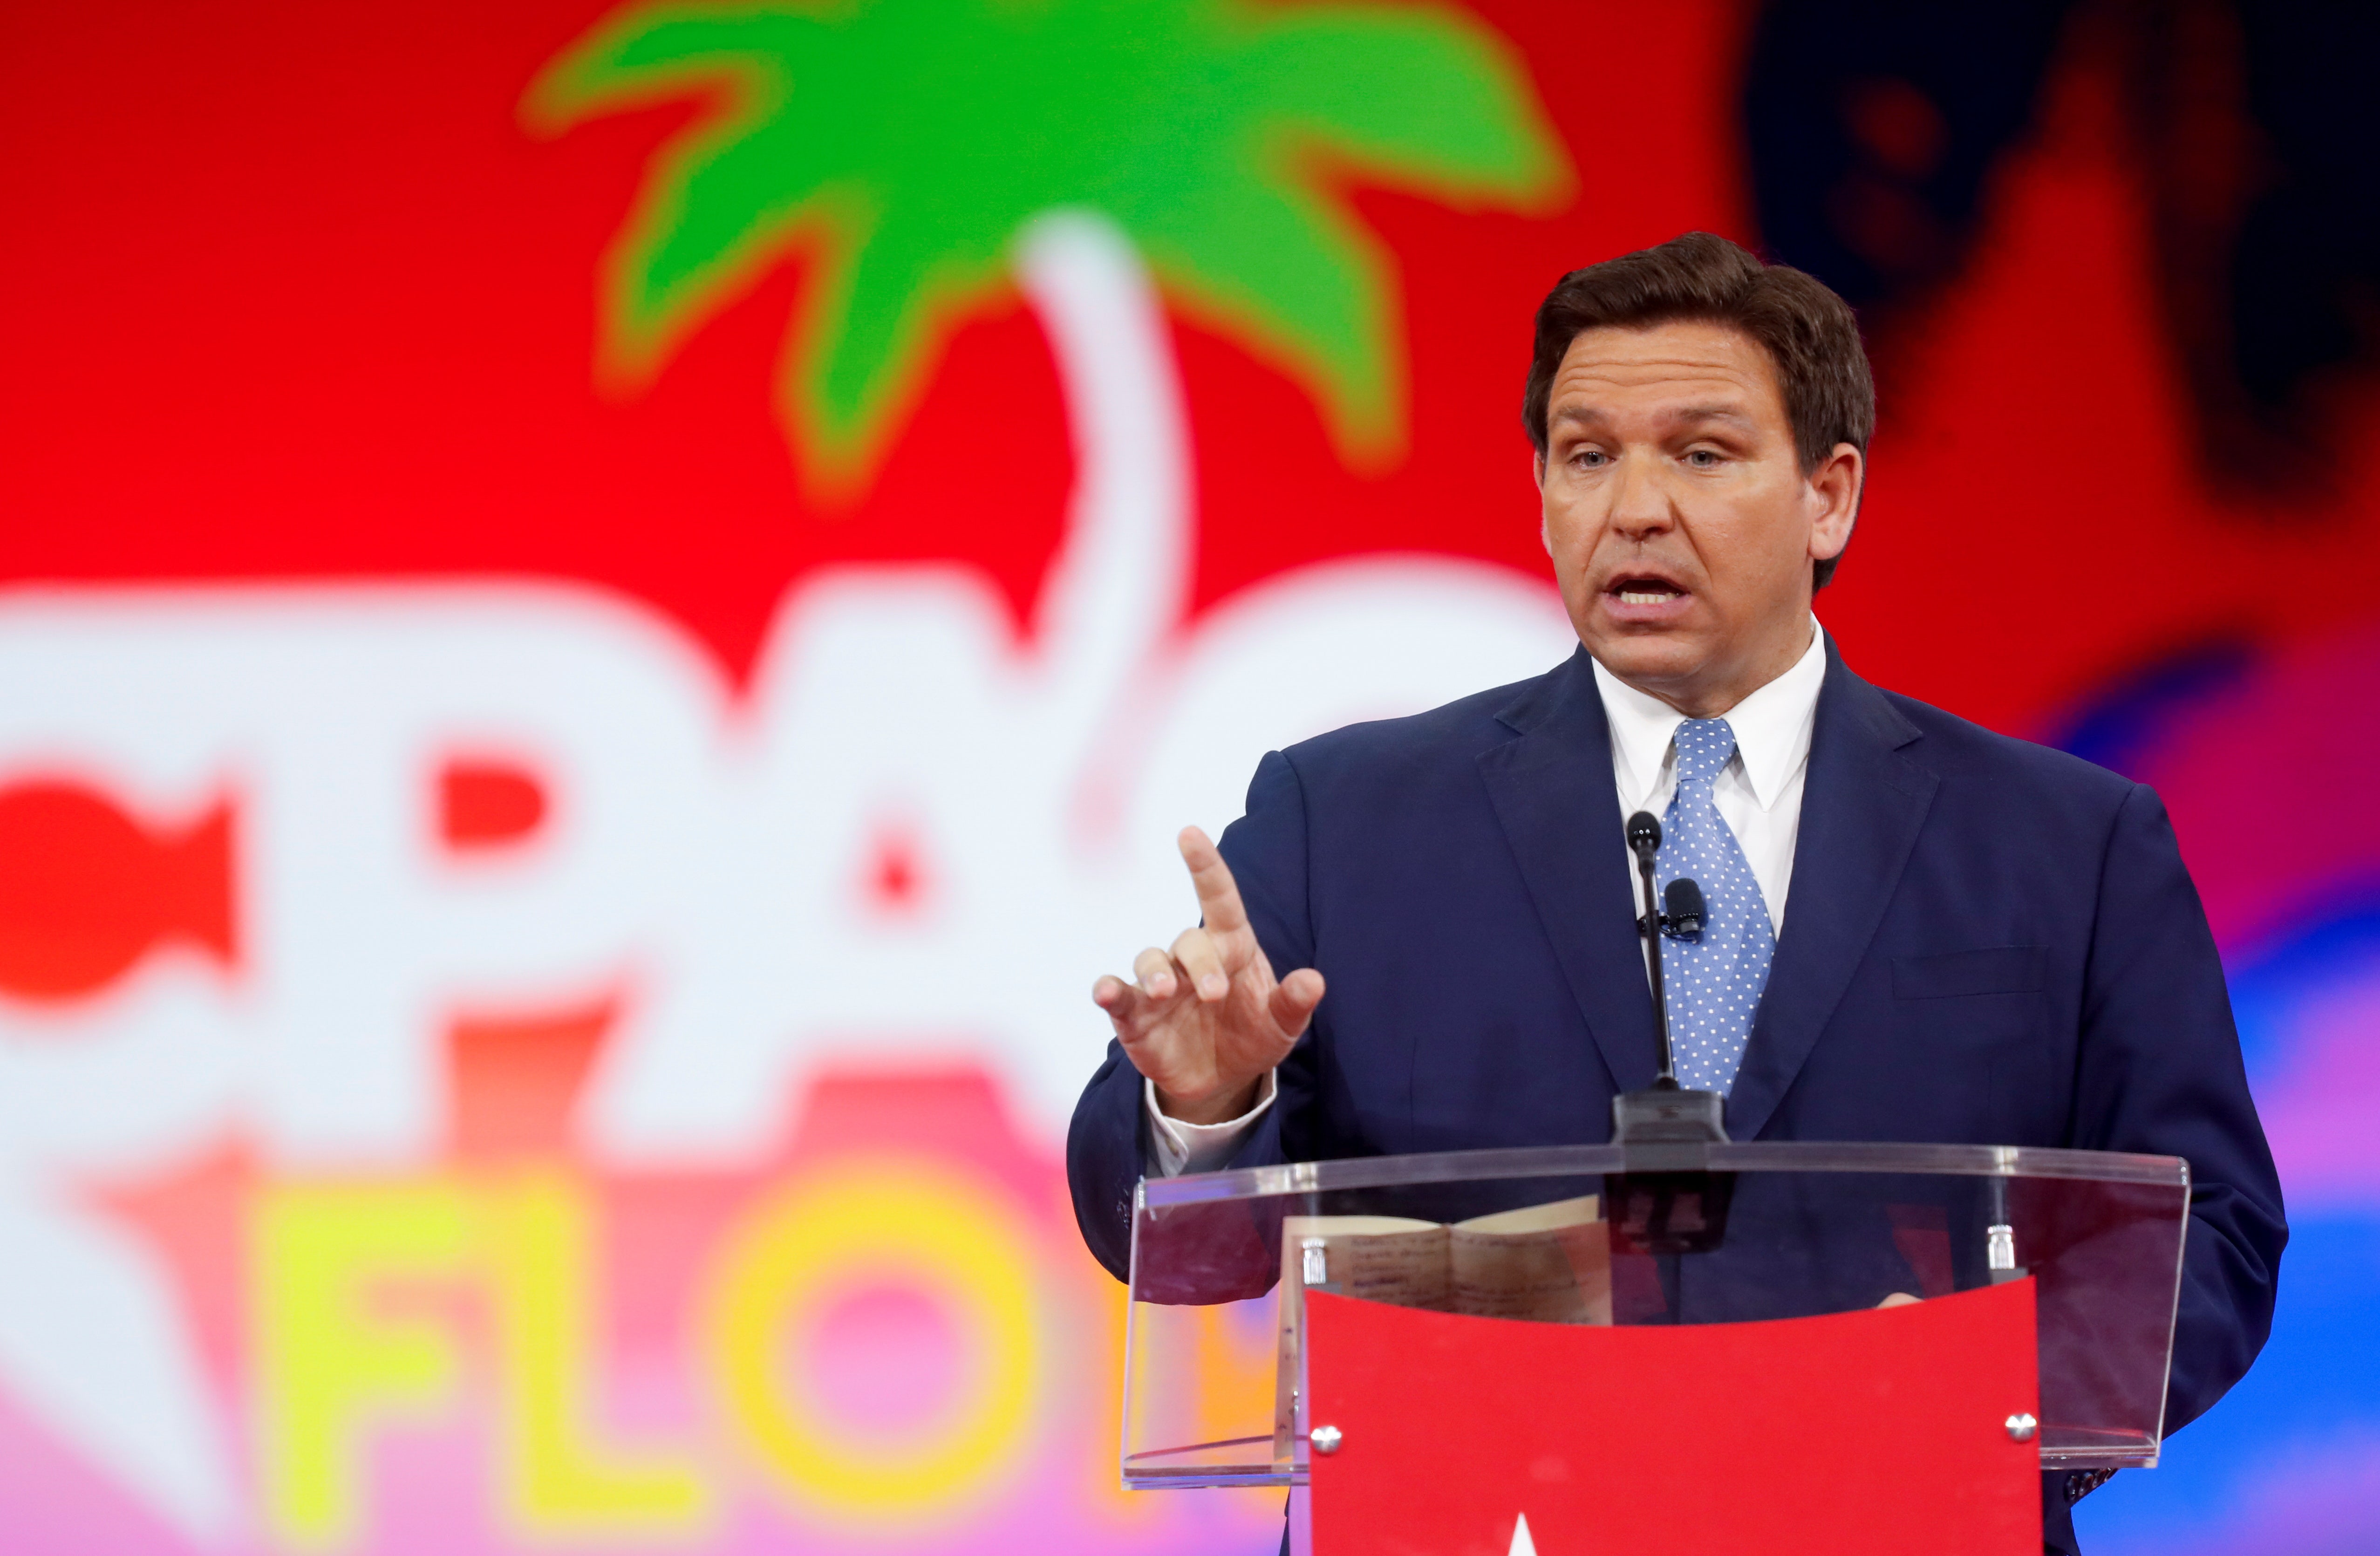 Florida Gov. Ron DeSantis suspends ‘Soros-backed’ state attorney who refused to enforce abortion ban – Fox News